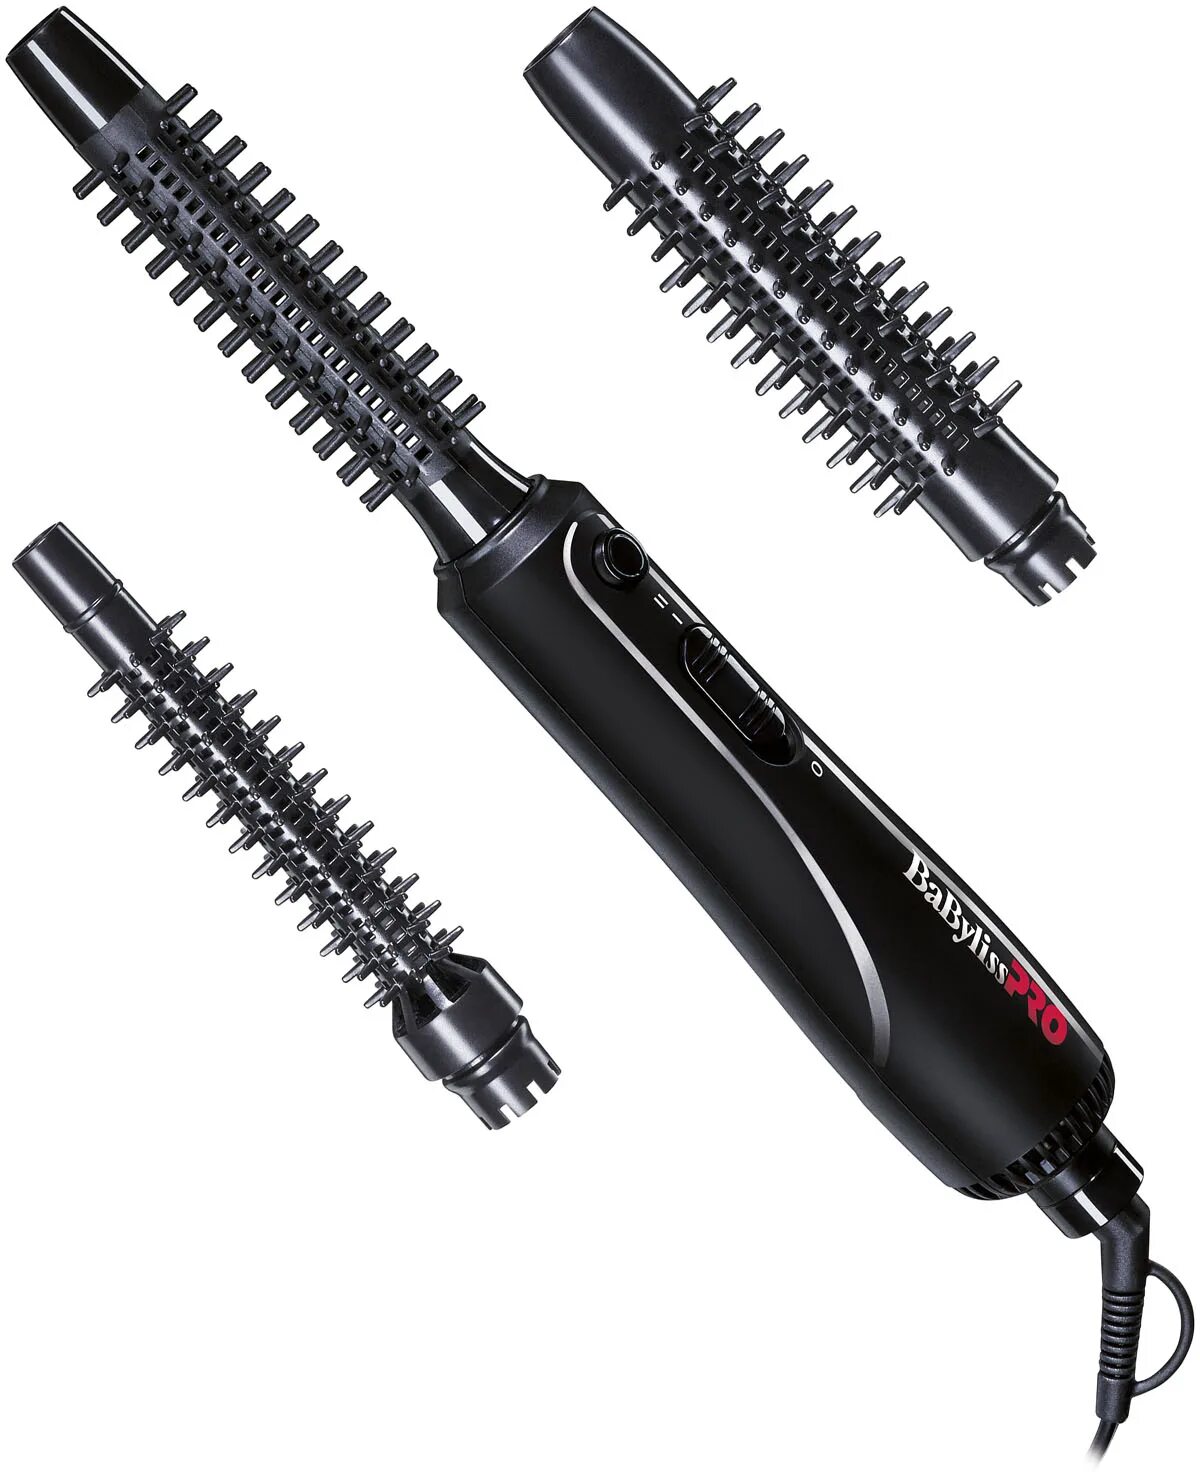 BABYLISS фен-щётка Trio Airstyler 300w. BABYLISS Pro Air Styler. BABYLISS Pro hot Air Styler. BABYLISS bab663e.